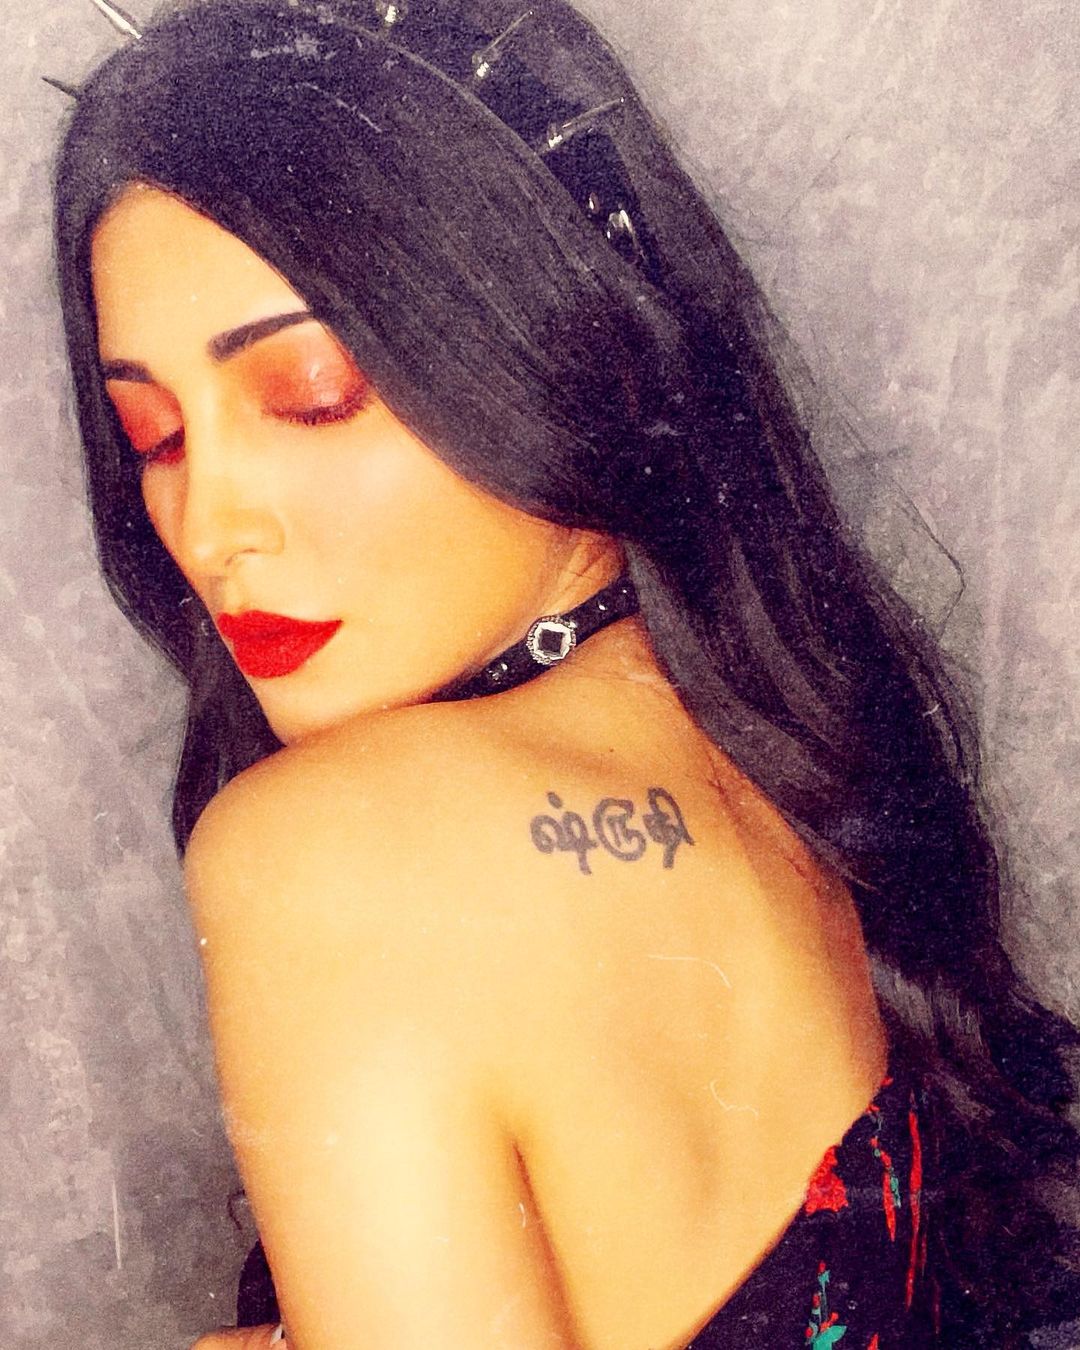 MUST READ! Have a look at Bollywood celebrities with their tattoos